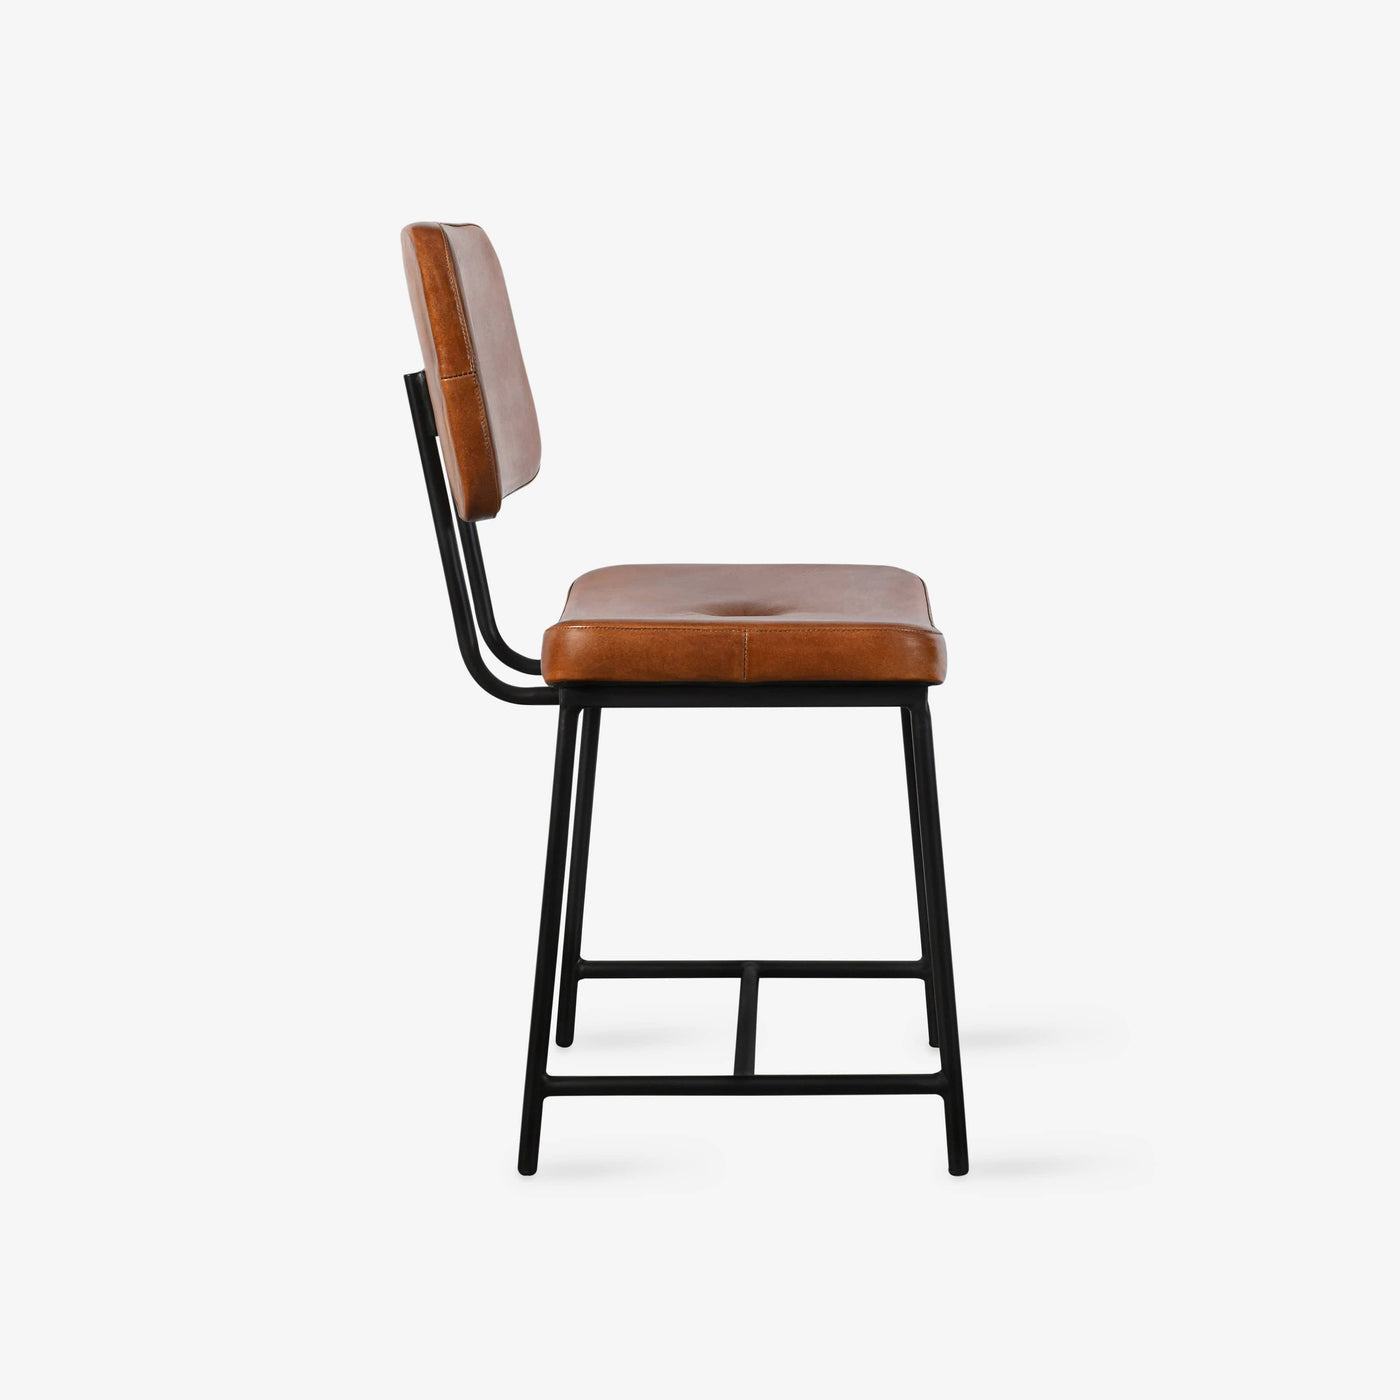 Ashby Leather Dining Chair, Tan Dining Chairs & Benches sazy.com